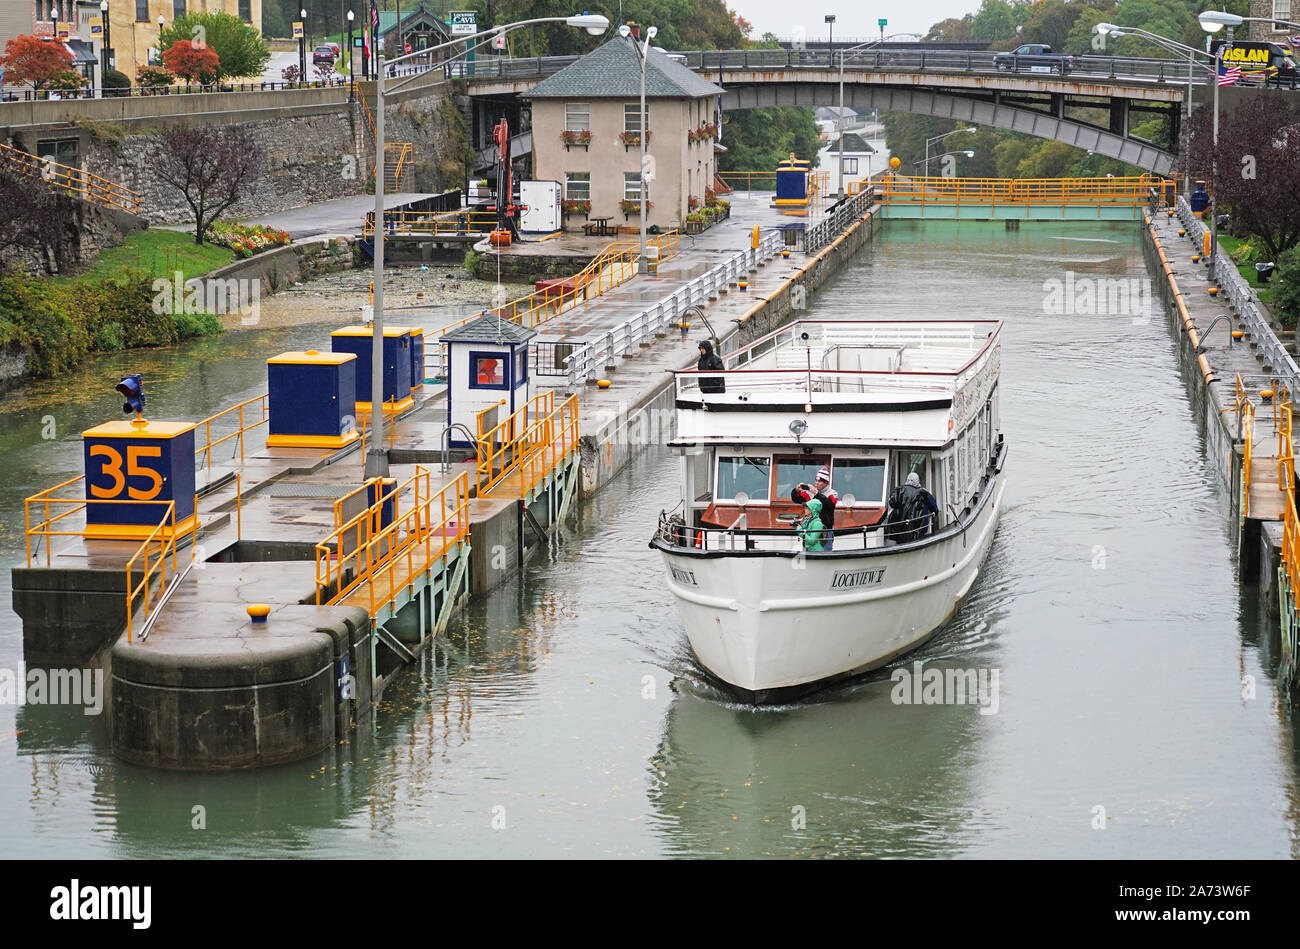 Erie Canal cruise boat Lockview V, a 125-passenger double-deck motor vessel built of the Great Lakes, exiting lock 34 at Lockport, New York. Stock Photo